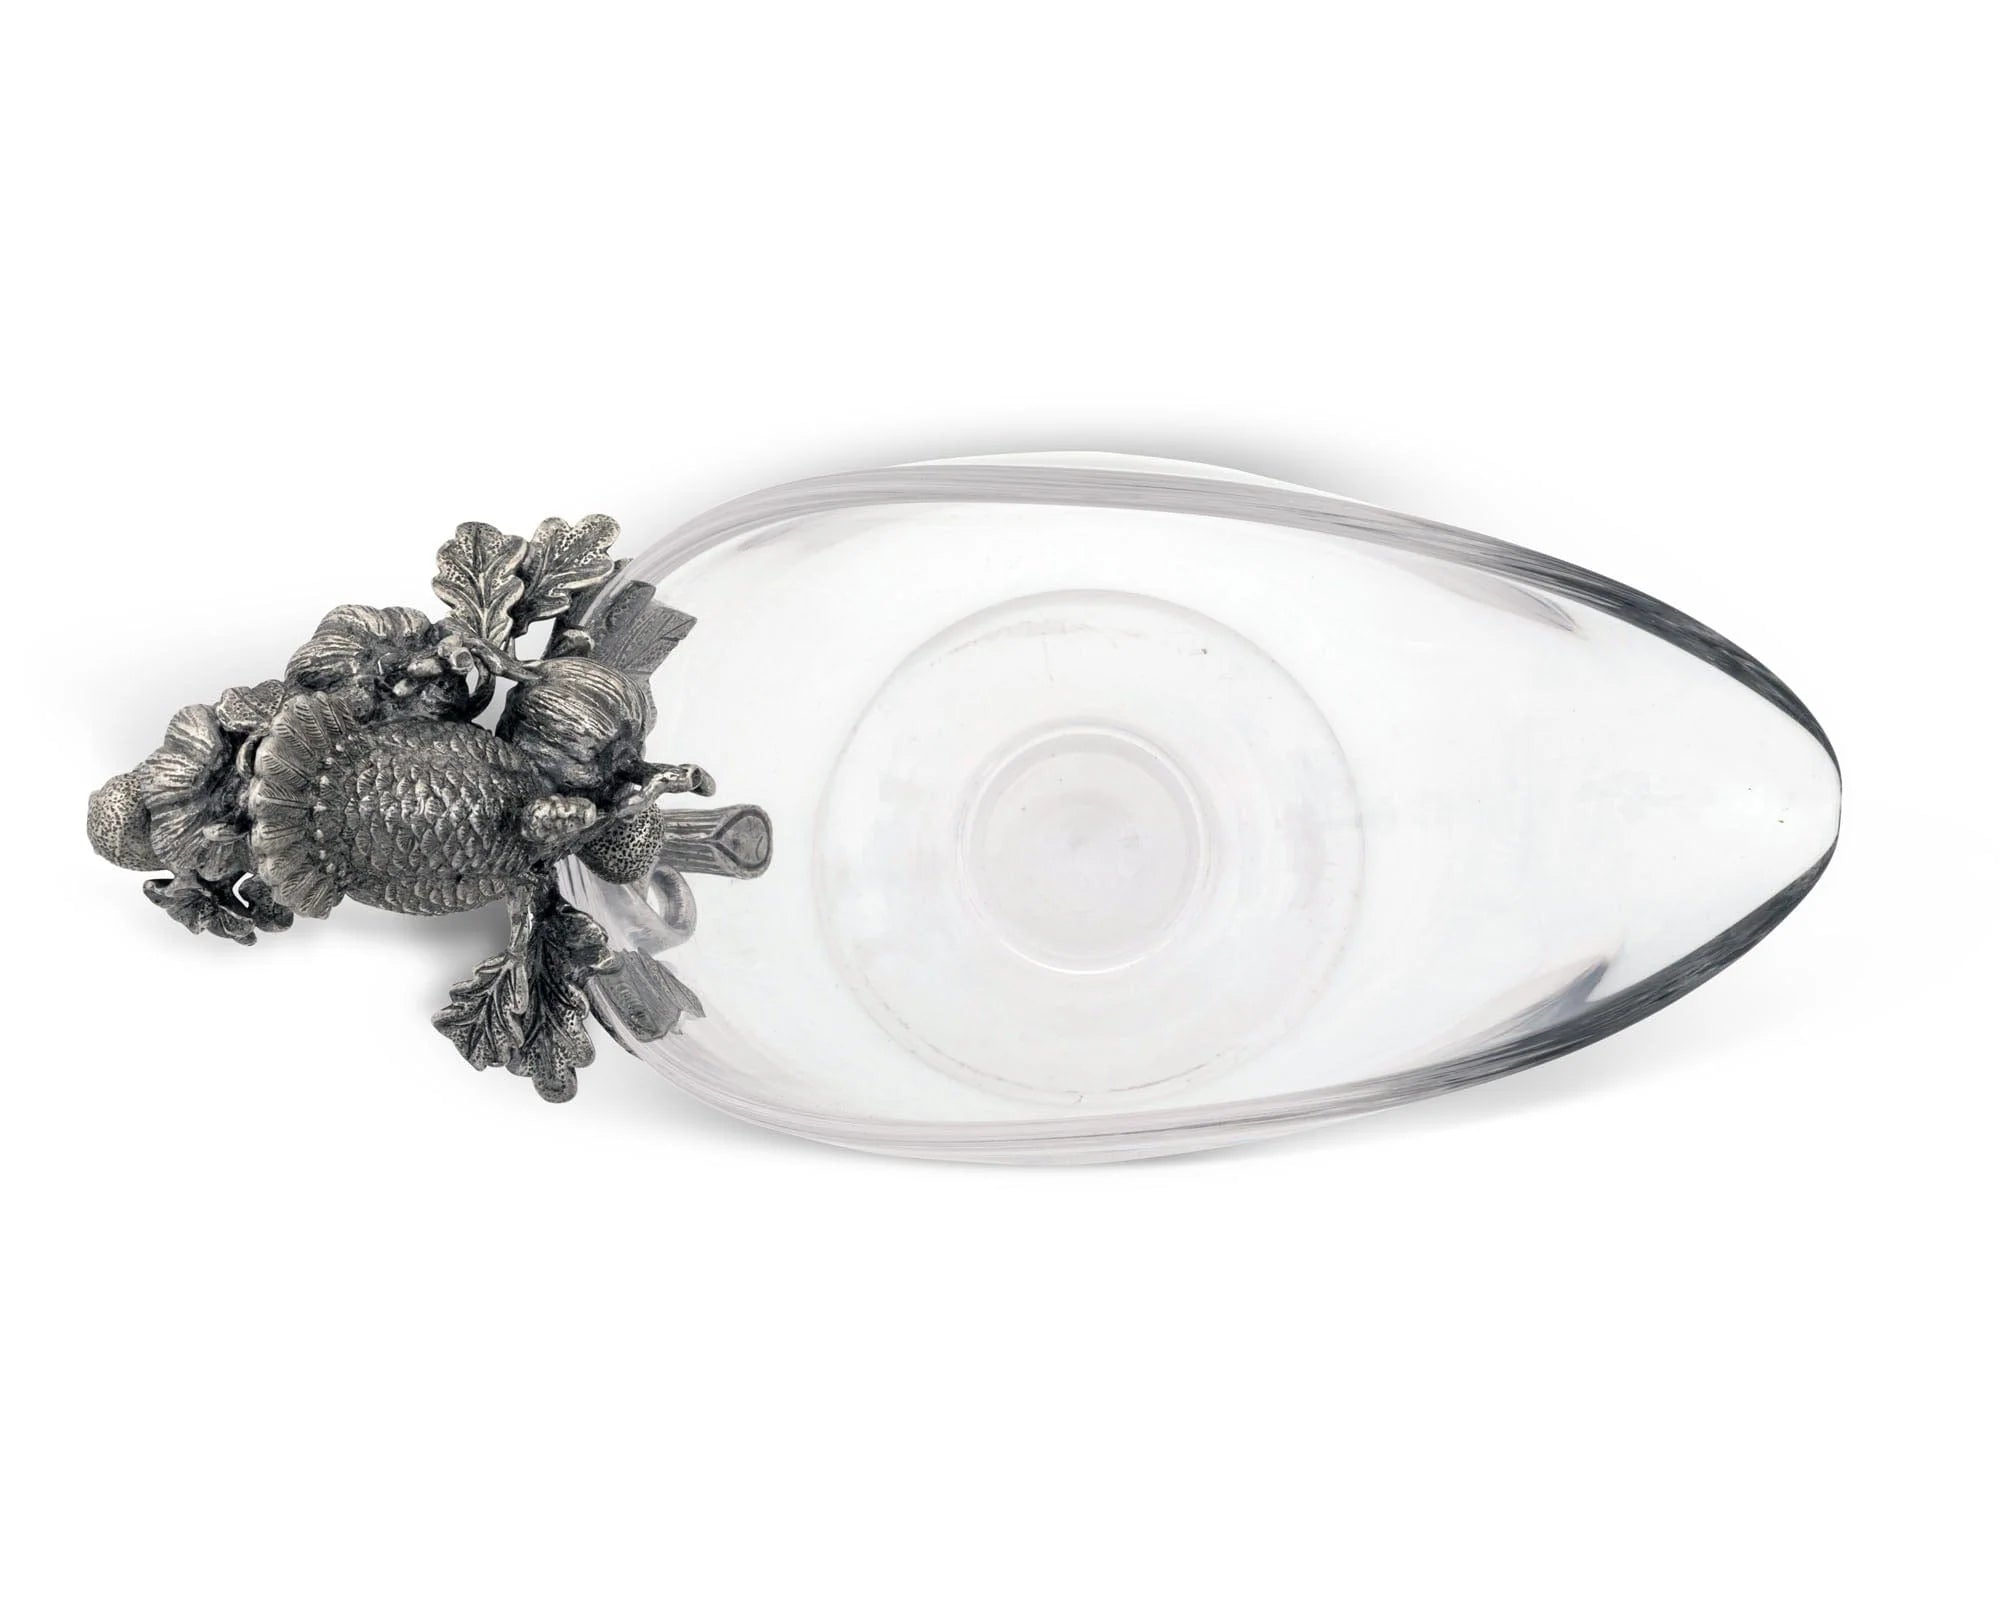 a top down view of a glass gravy boat with pewter handle adorned with noble symbols of autumn's abundance